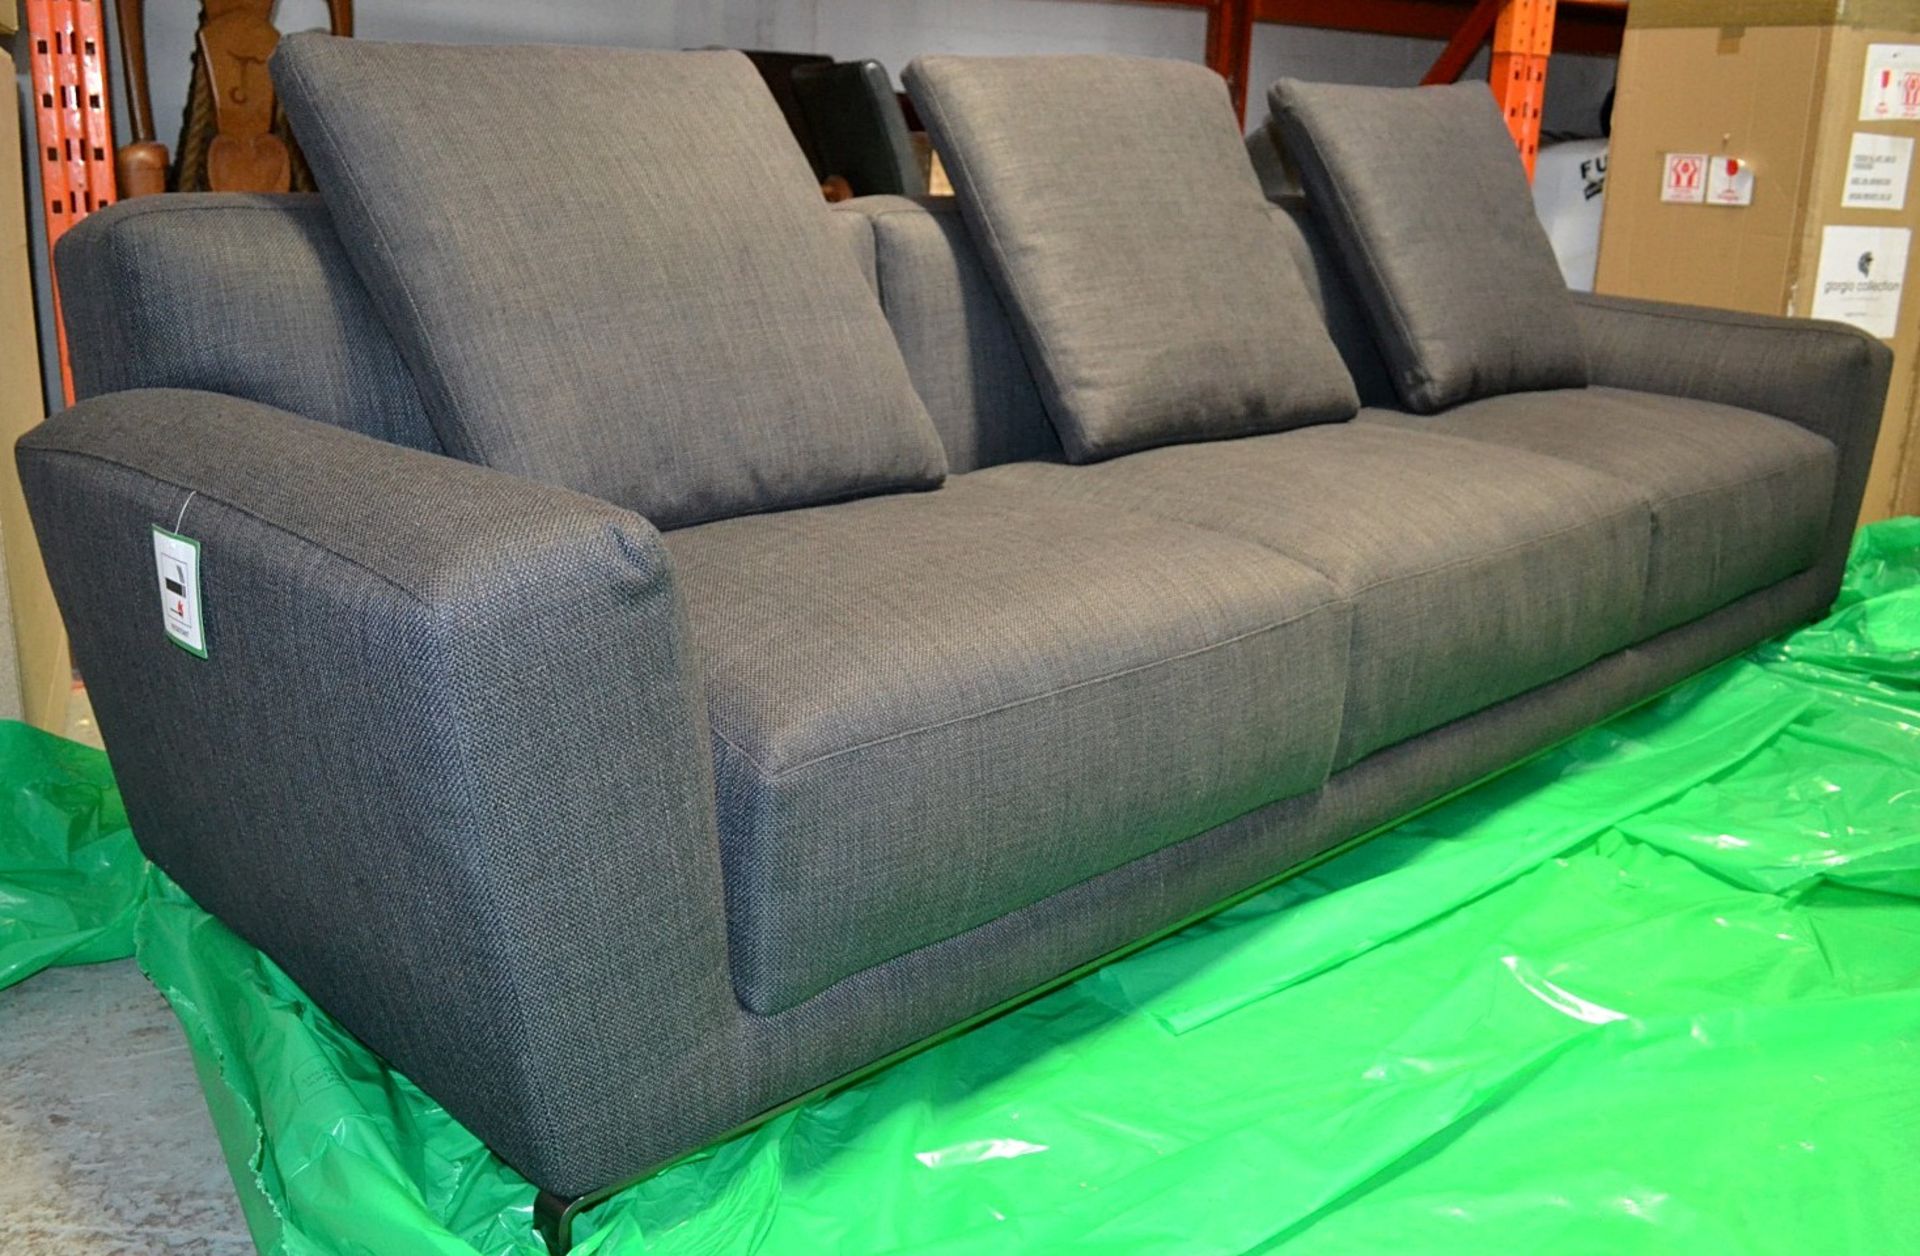 1 x Large B&B Italia "Luis" Sofa - 2.8 Metres Wide - Richly Upholstered In A Grey/Blue Fabric - - Image 3 of 5